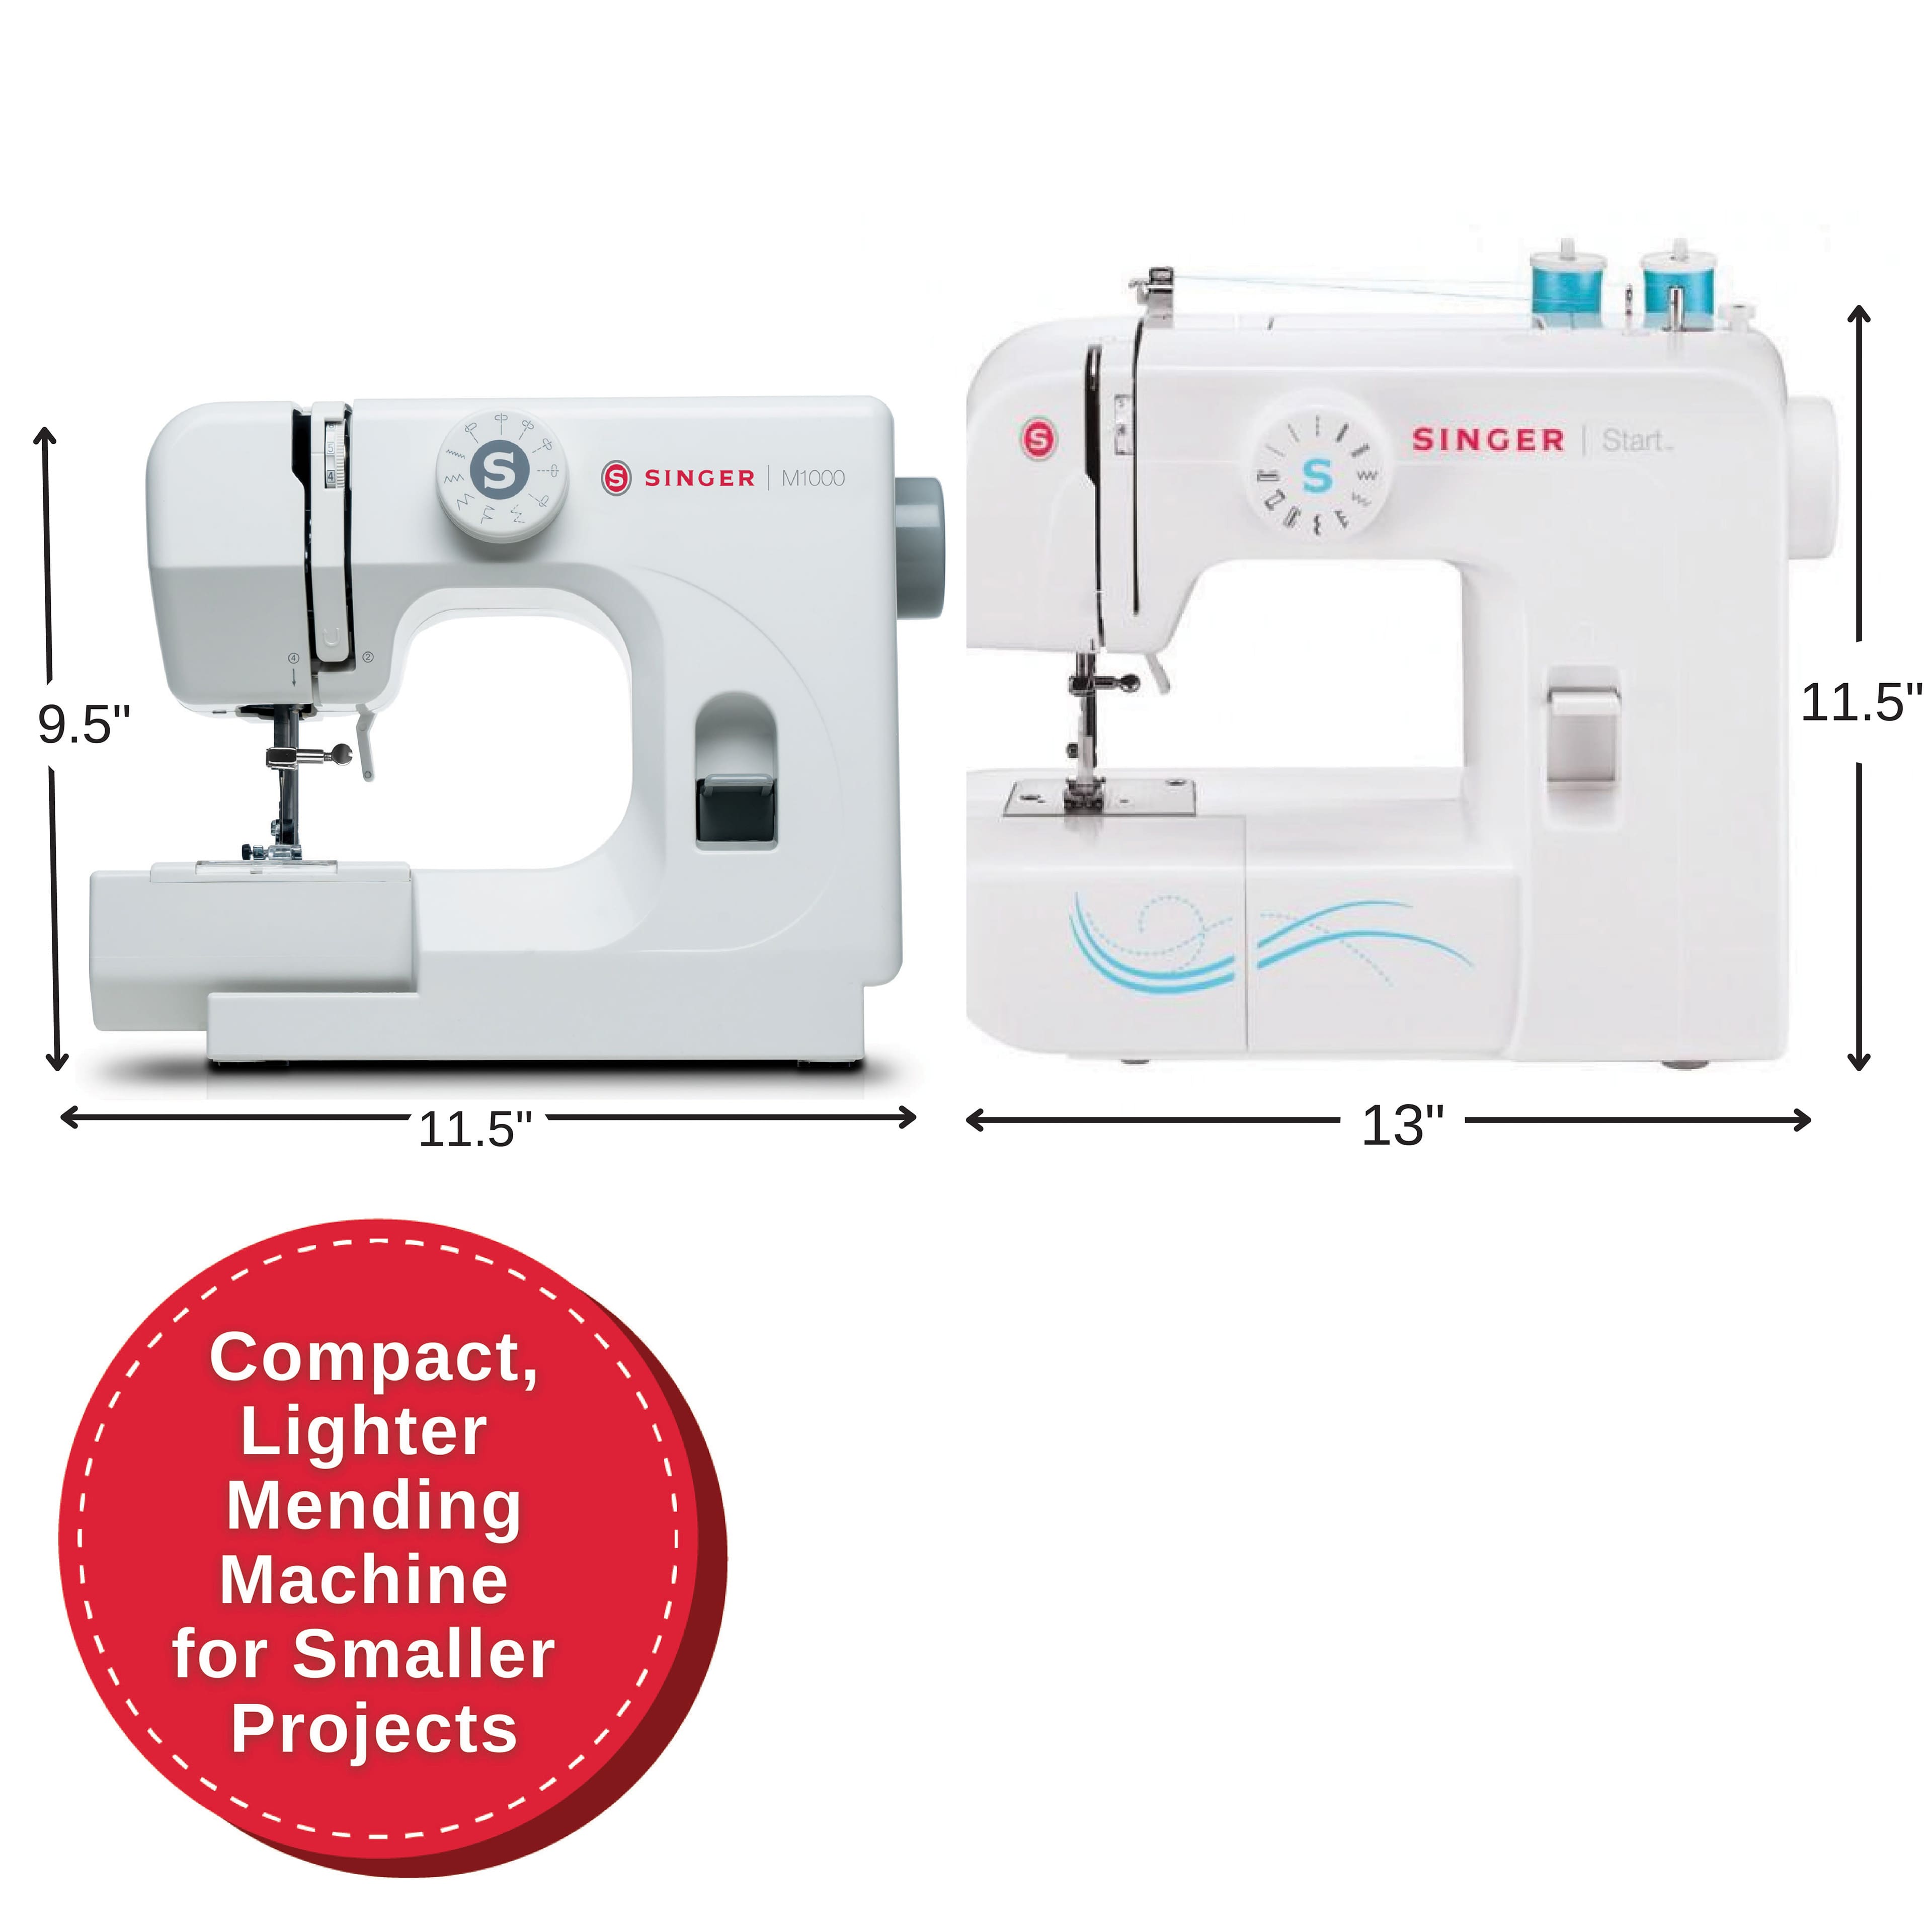 SINGER Mending M1000 Mend & Sew Sewing Machine for sale online